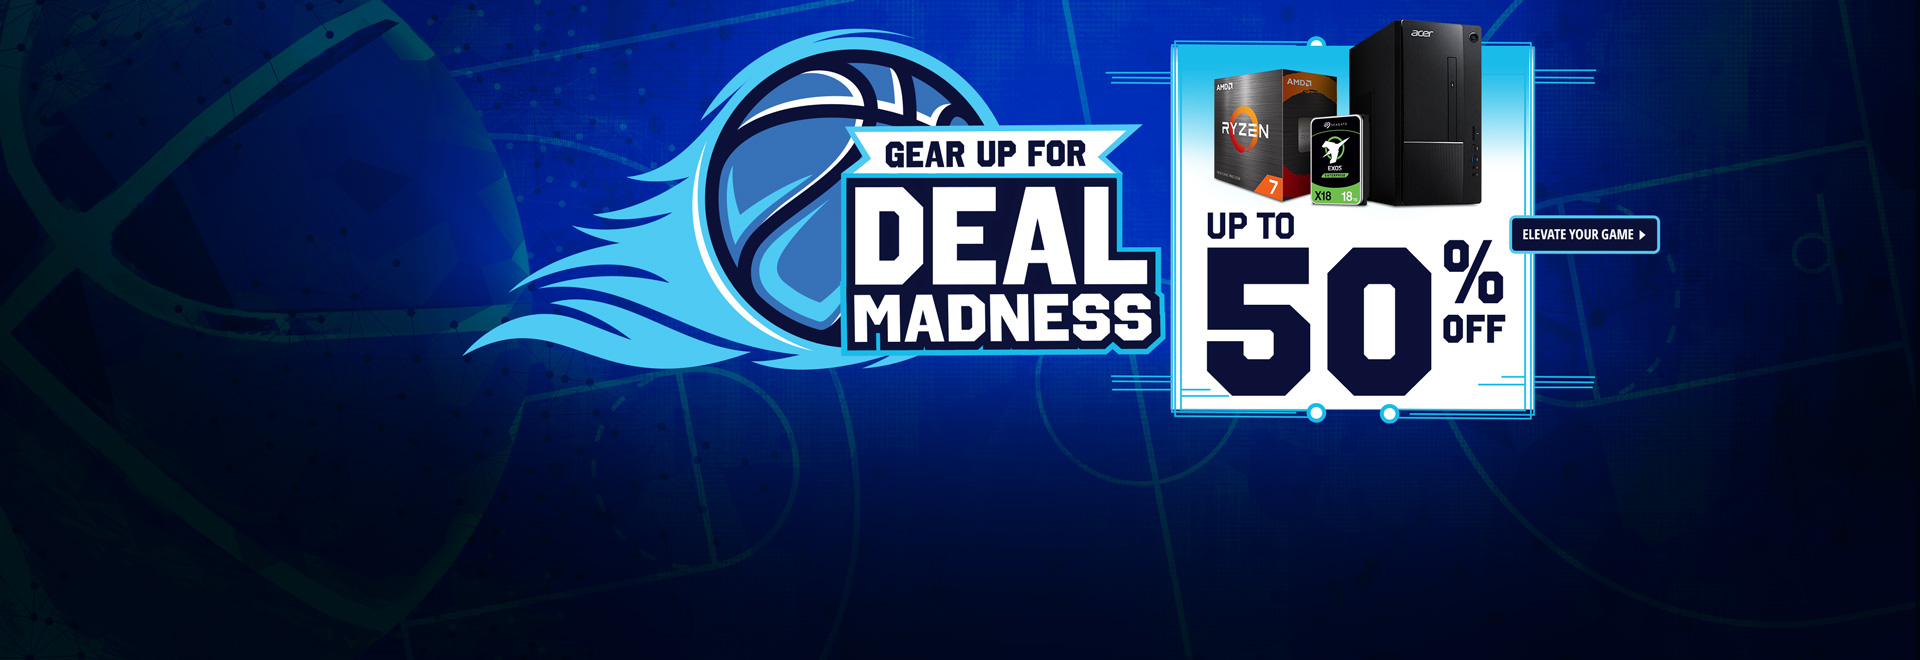 Gear Up for Deal Madness